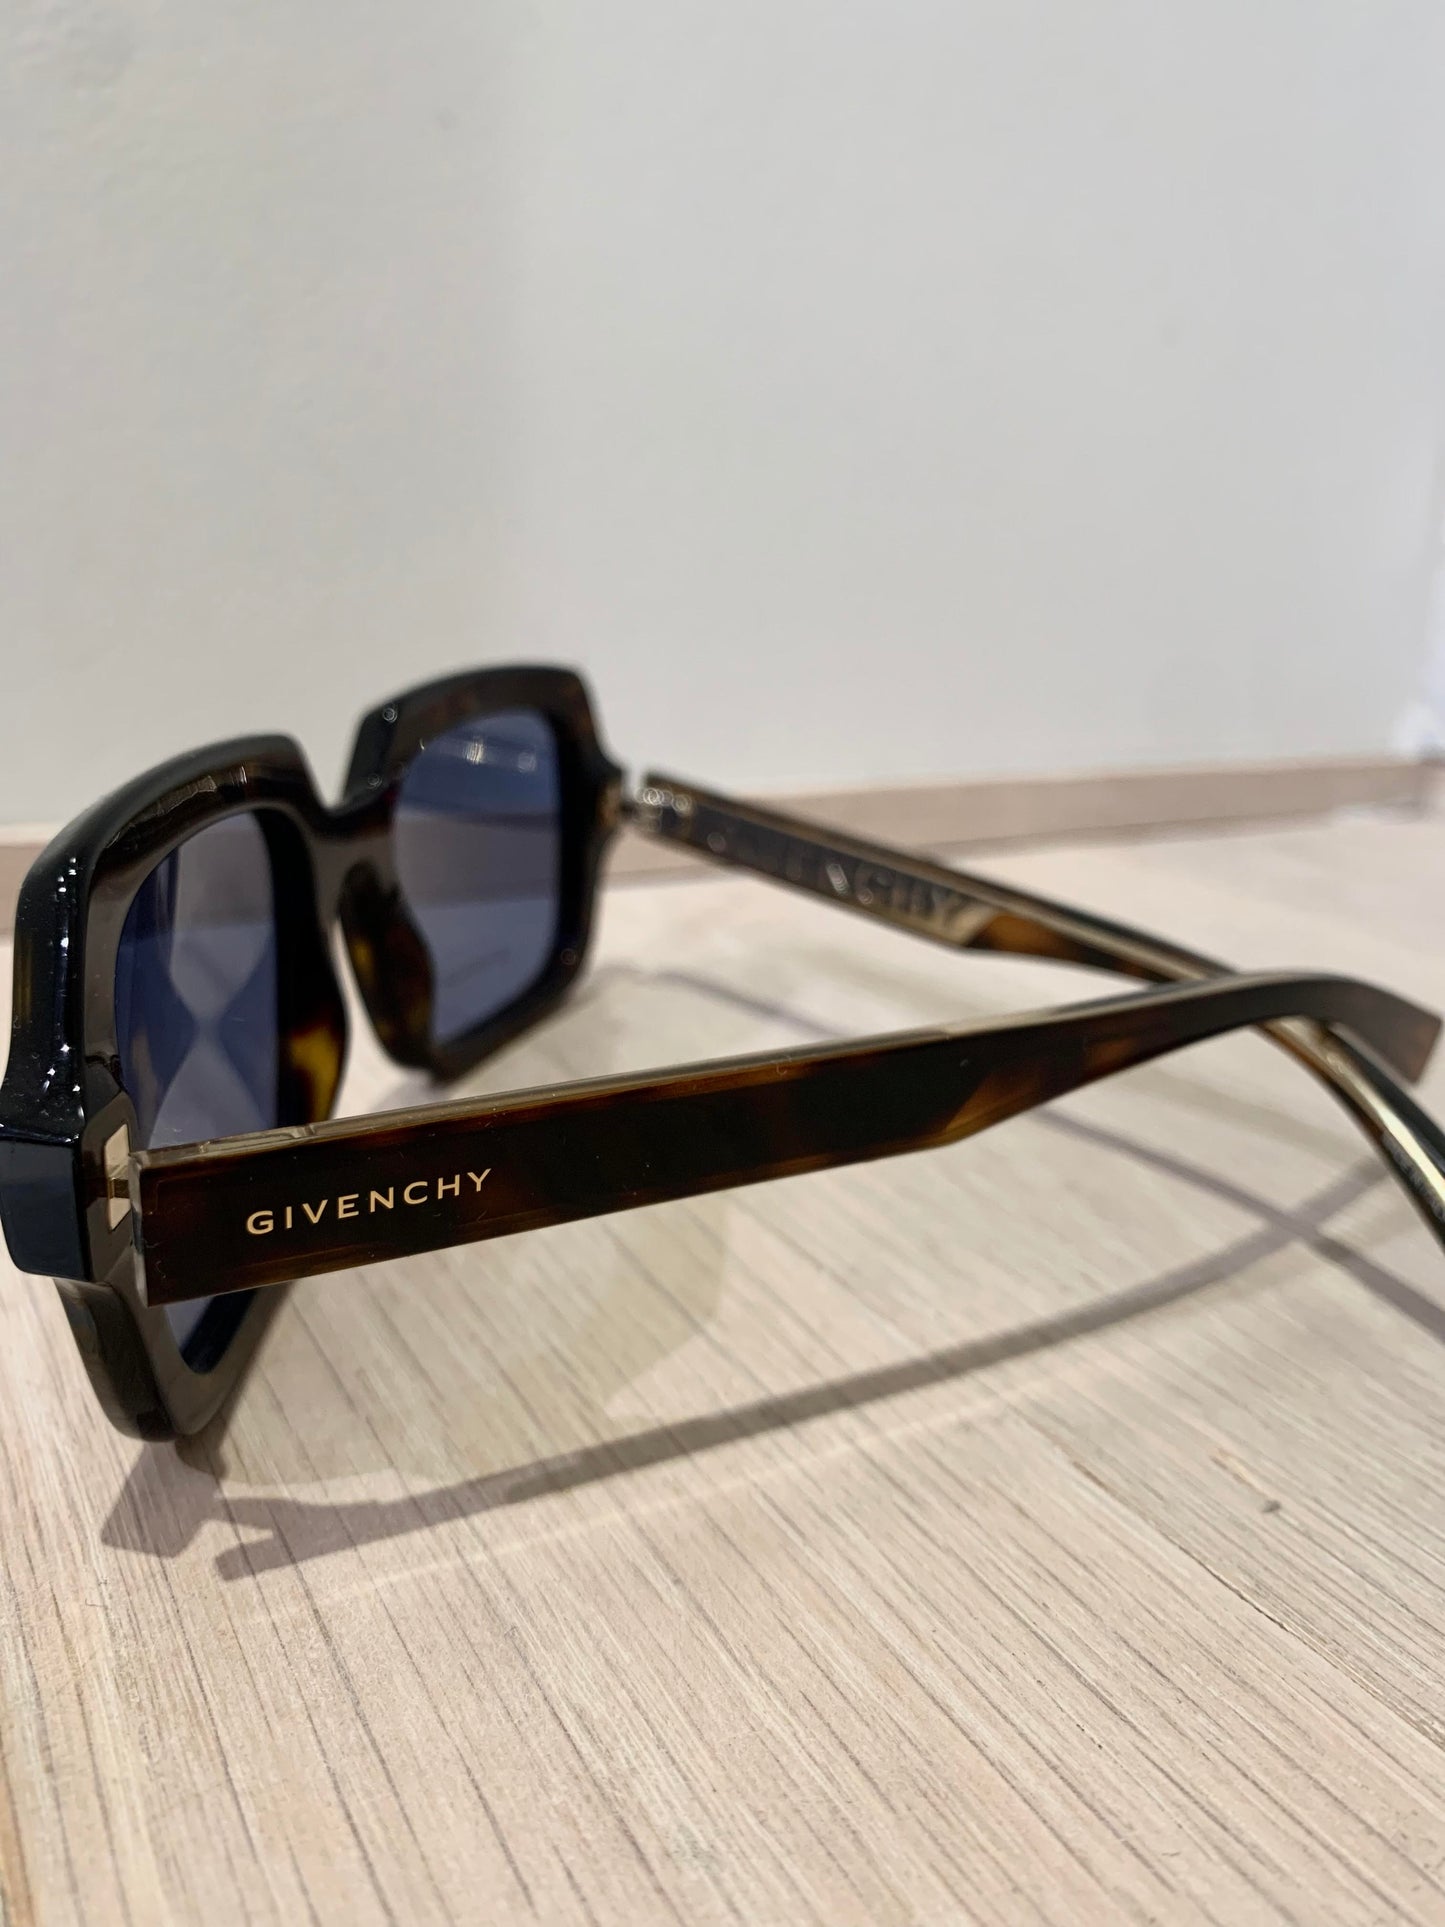 GIVENCHY - SUNGLASSES - SQUARE (3 COLORS)